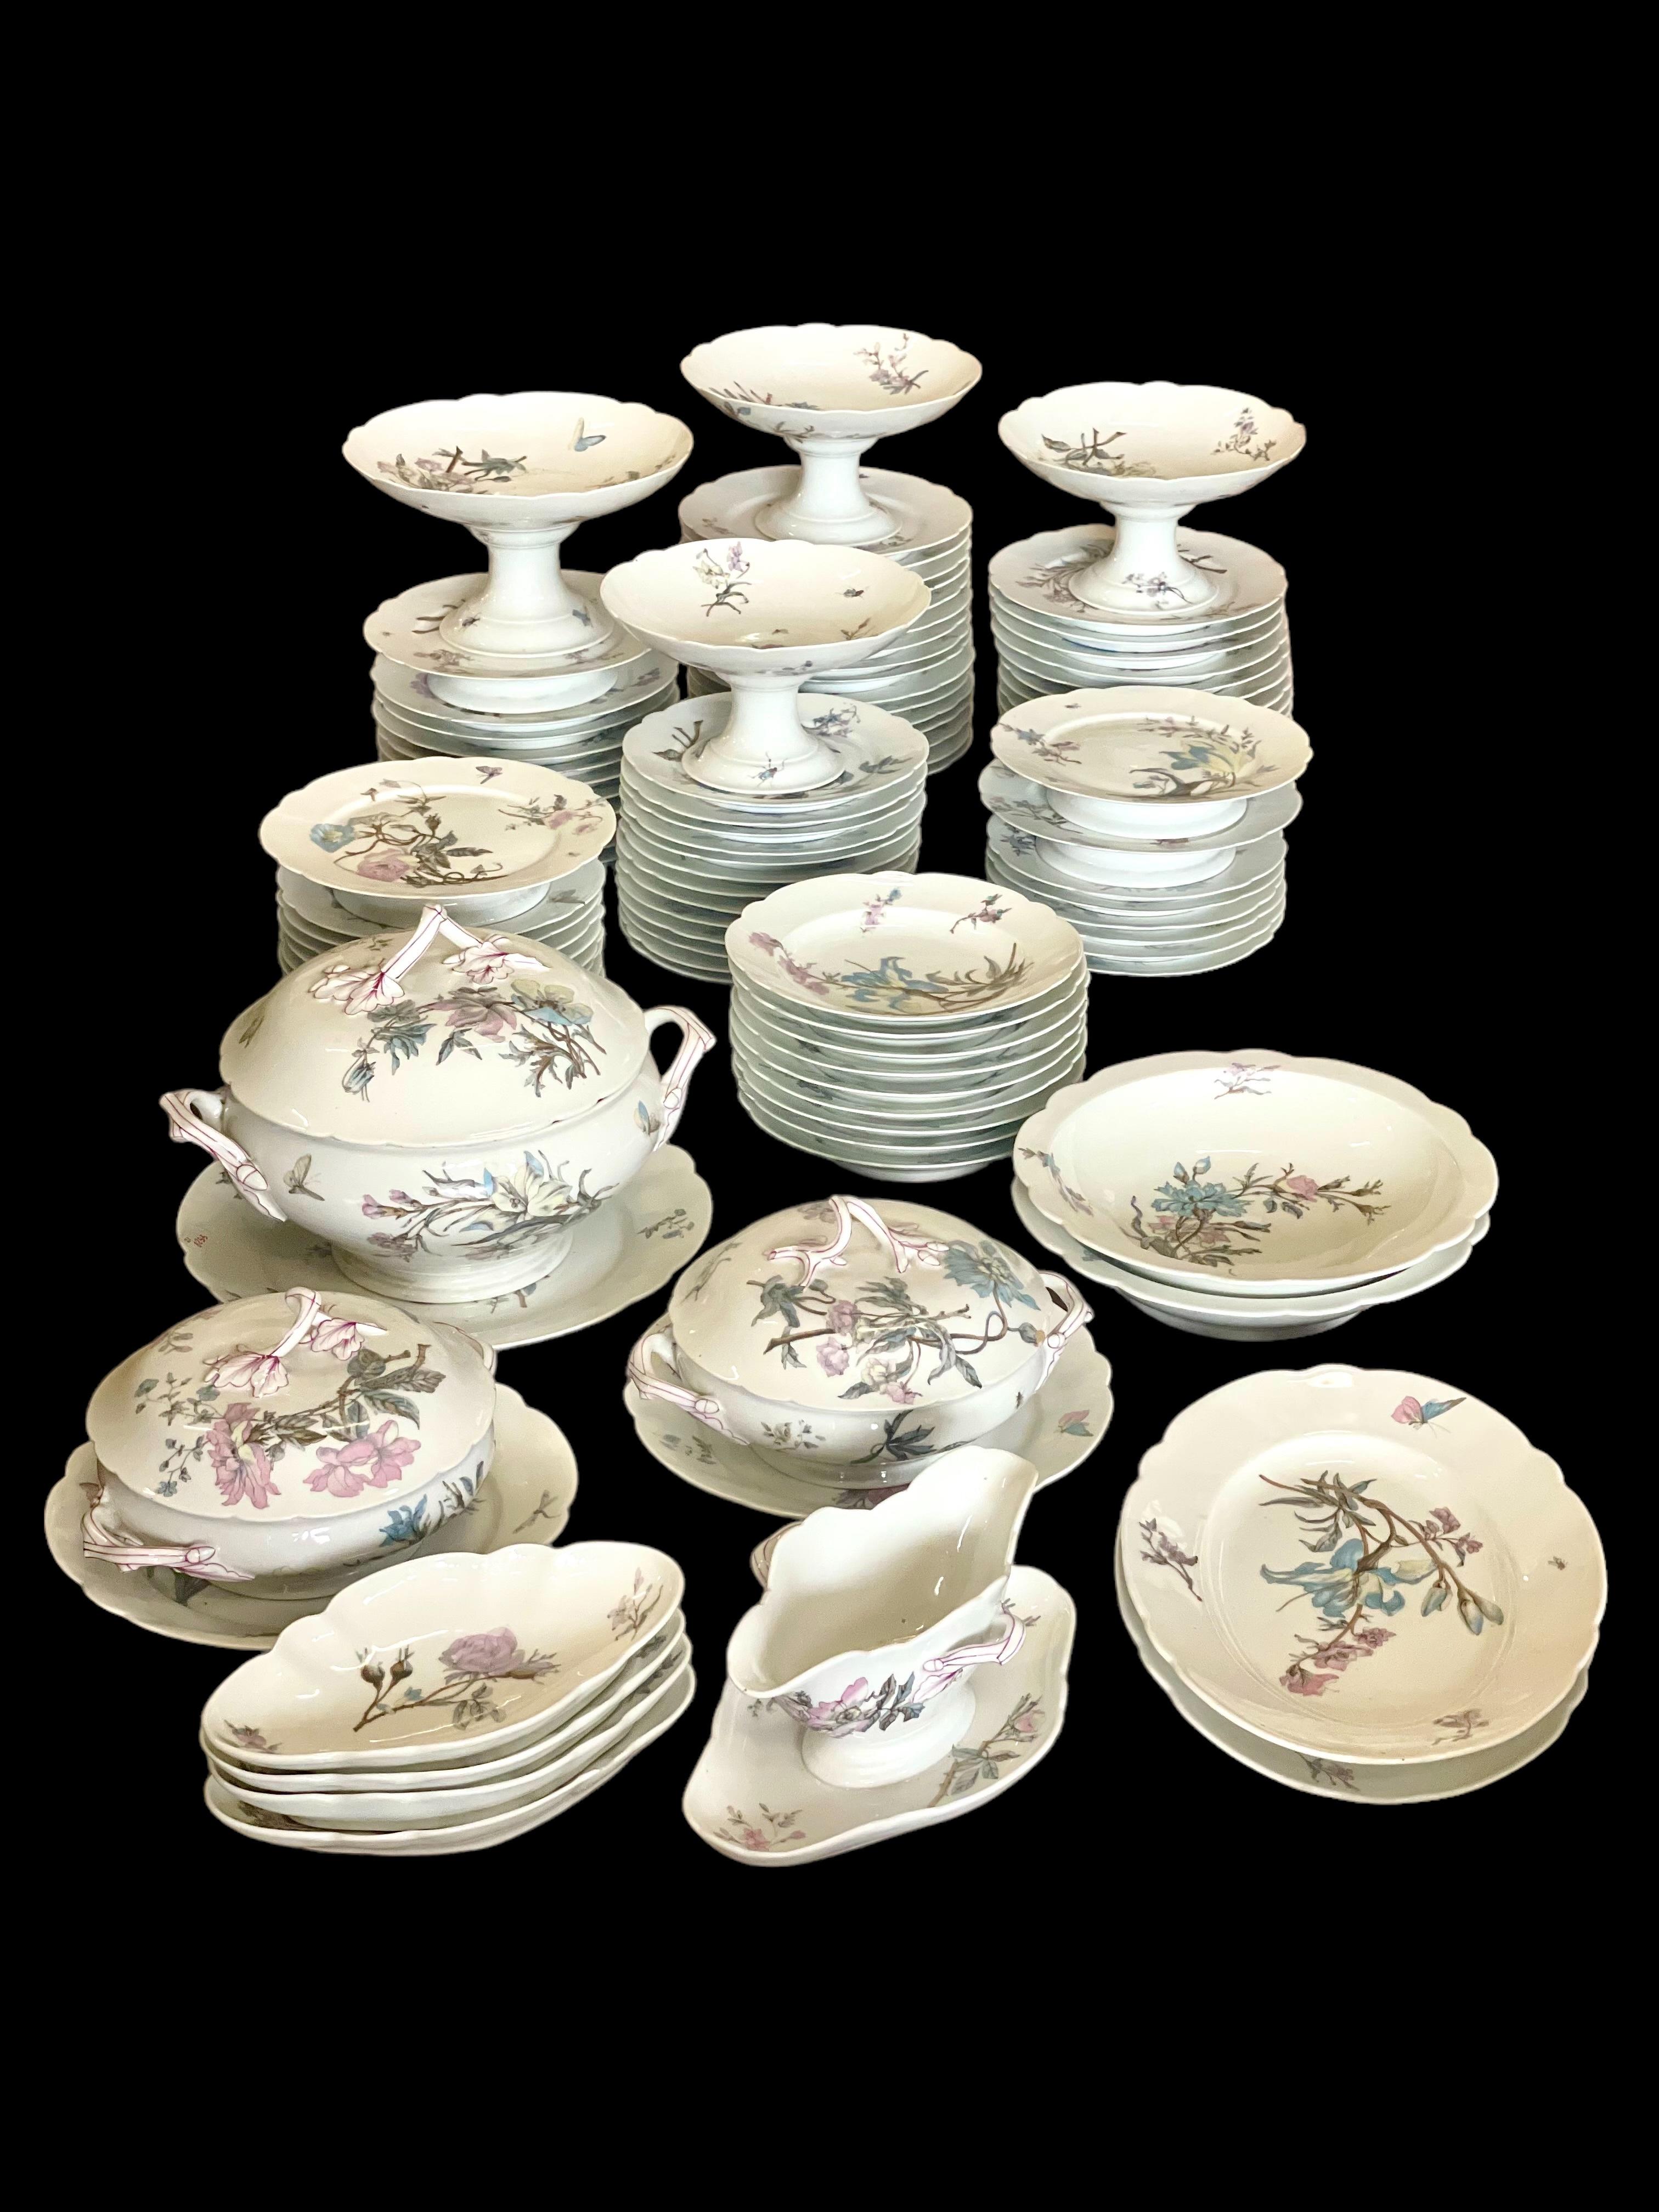 102-Piece Porcelain Dinner Service with Flowers and Butterflies 1